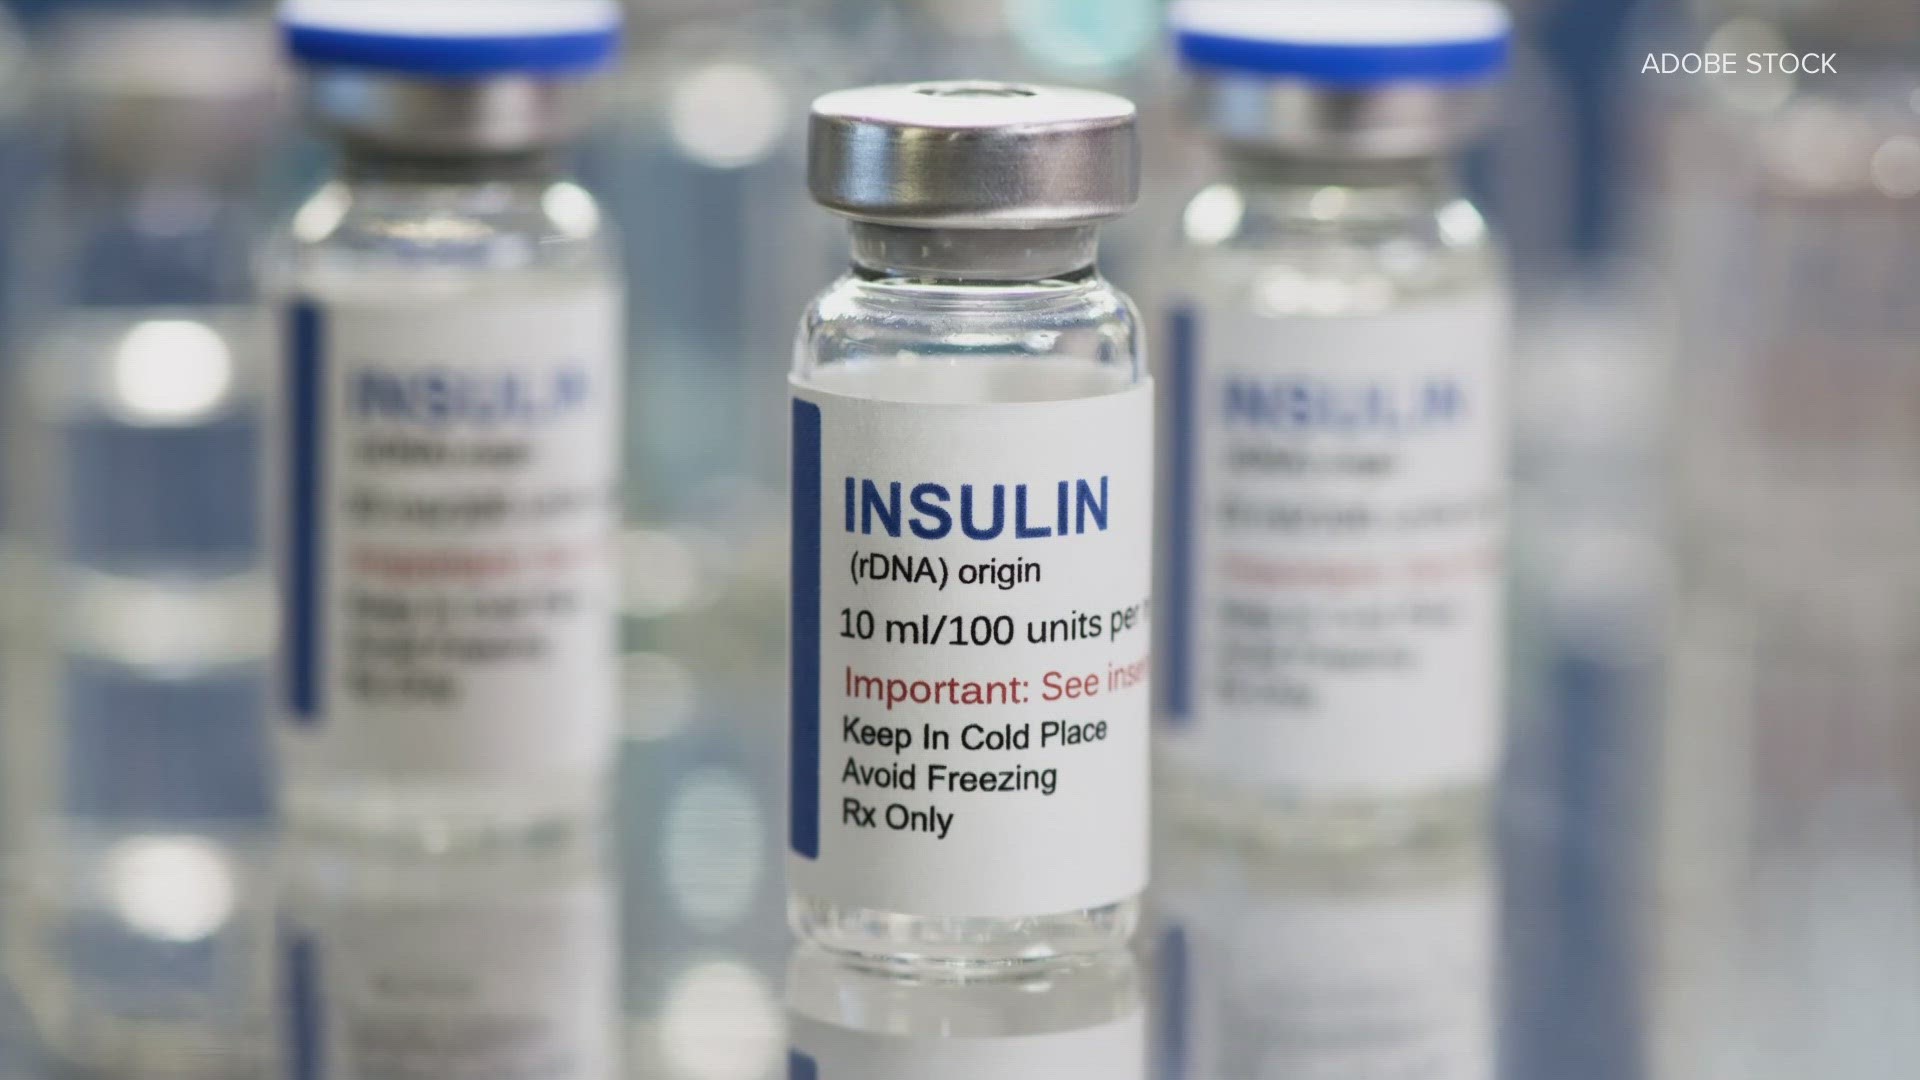 Low supply along with high demand have resulted in diabetics being denied insulin at the pharmacies.